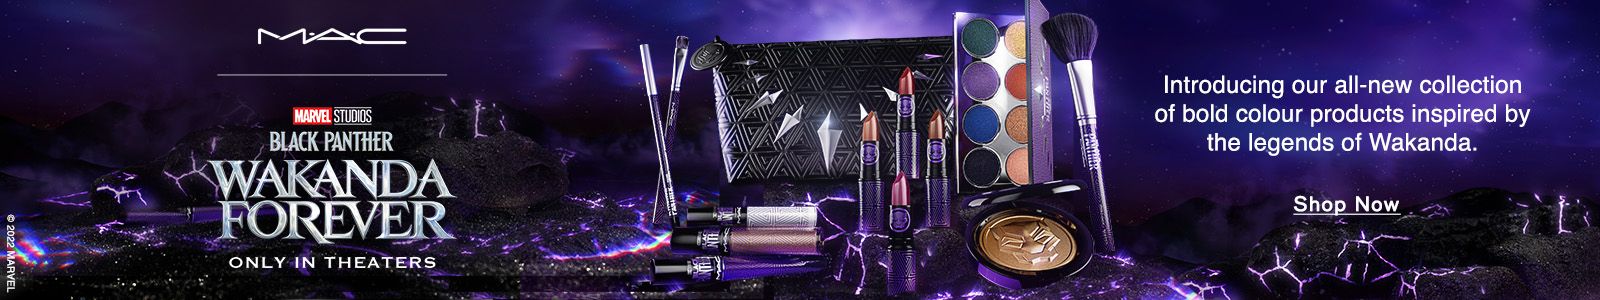 MAC, Wakanda Forever, Only In Theaters, Introducing our all-new collection of bold colour products inspired by the legends of Wakanda, Shop Now